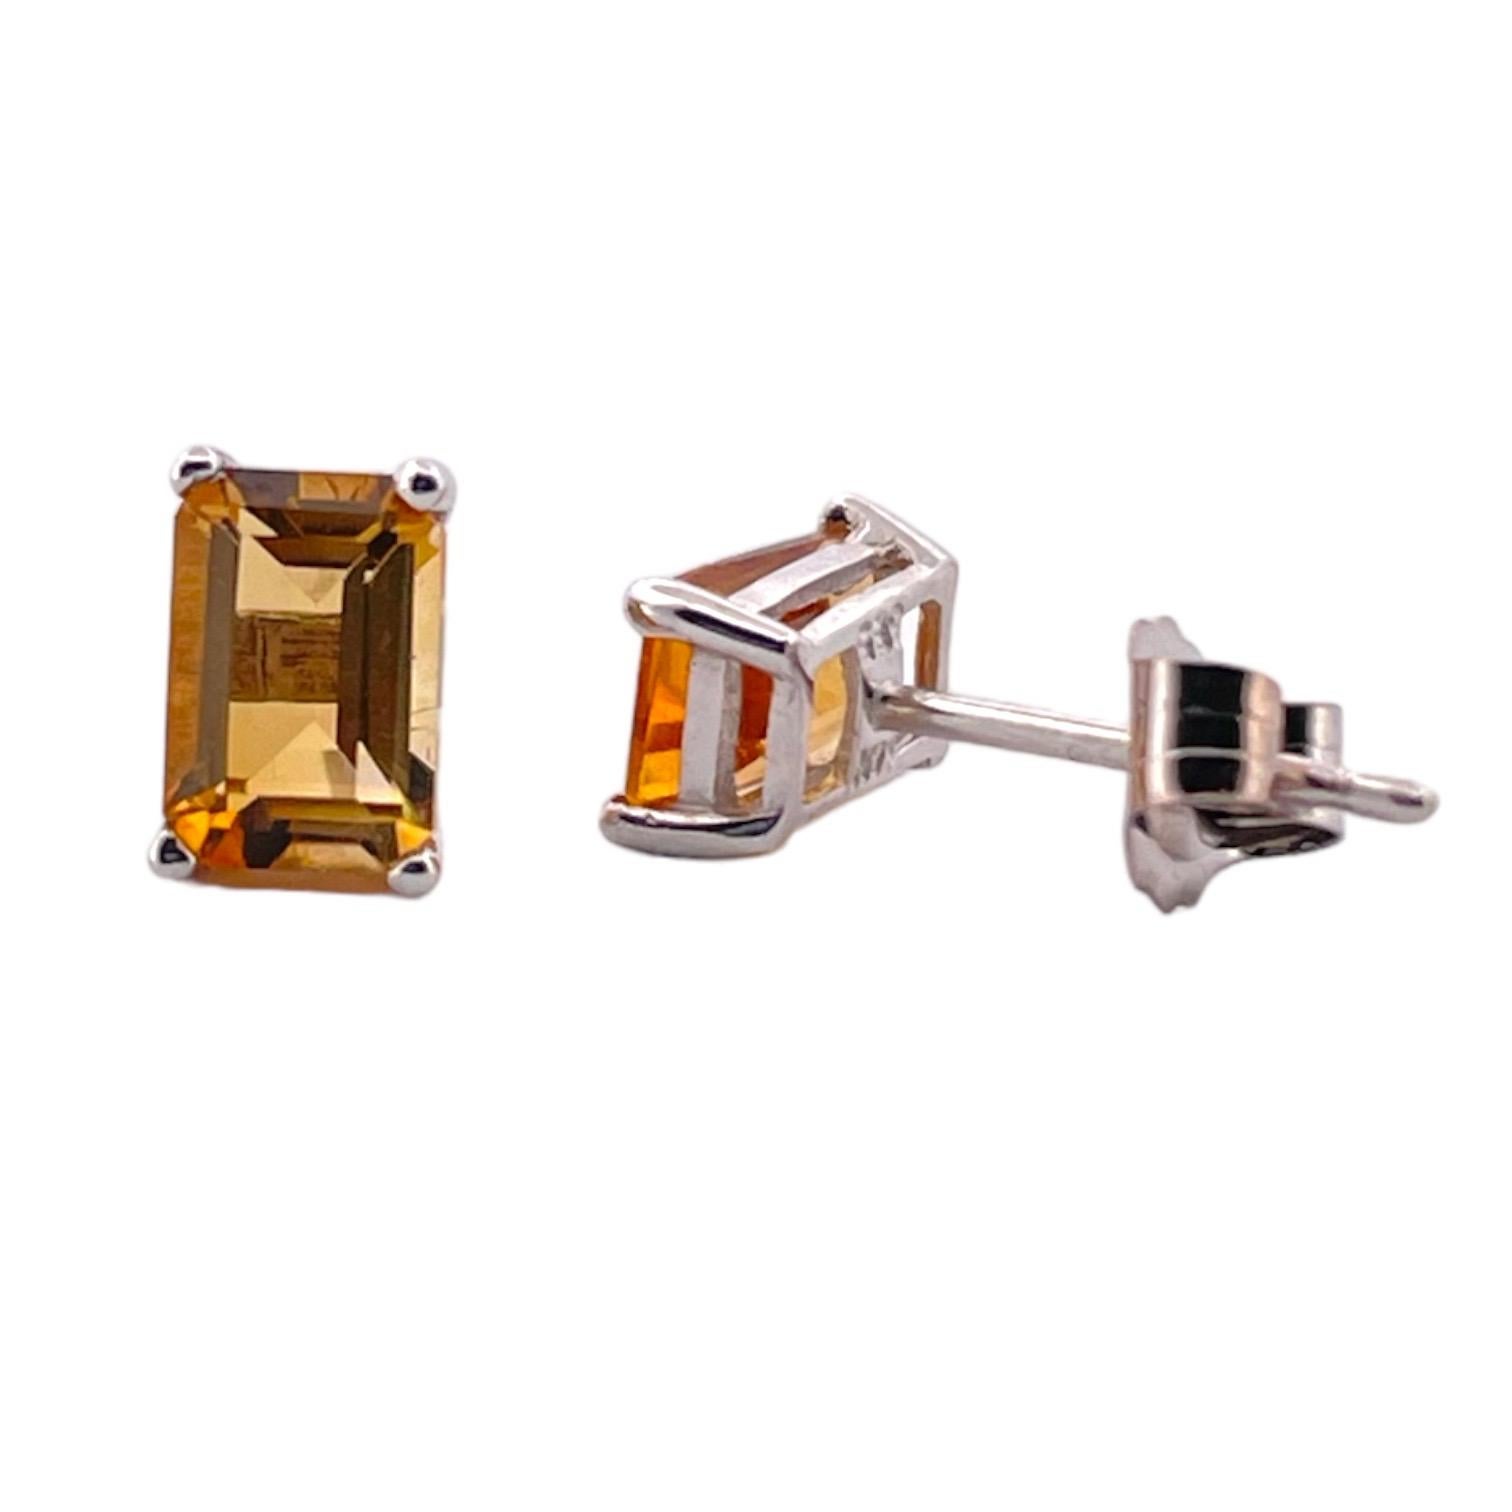 Illuminate your look with the Radiant Elegance Rectangular Citrine Stud Earrings, expertly crafted in sleek 14K white gold. Weighing a delicate 0.73 grams, these earrings present a pair of beautifully faceted, rectangular citrine gemstones, each one